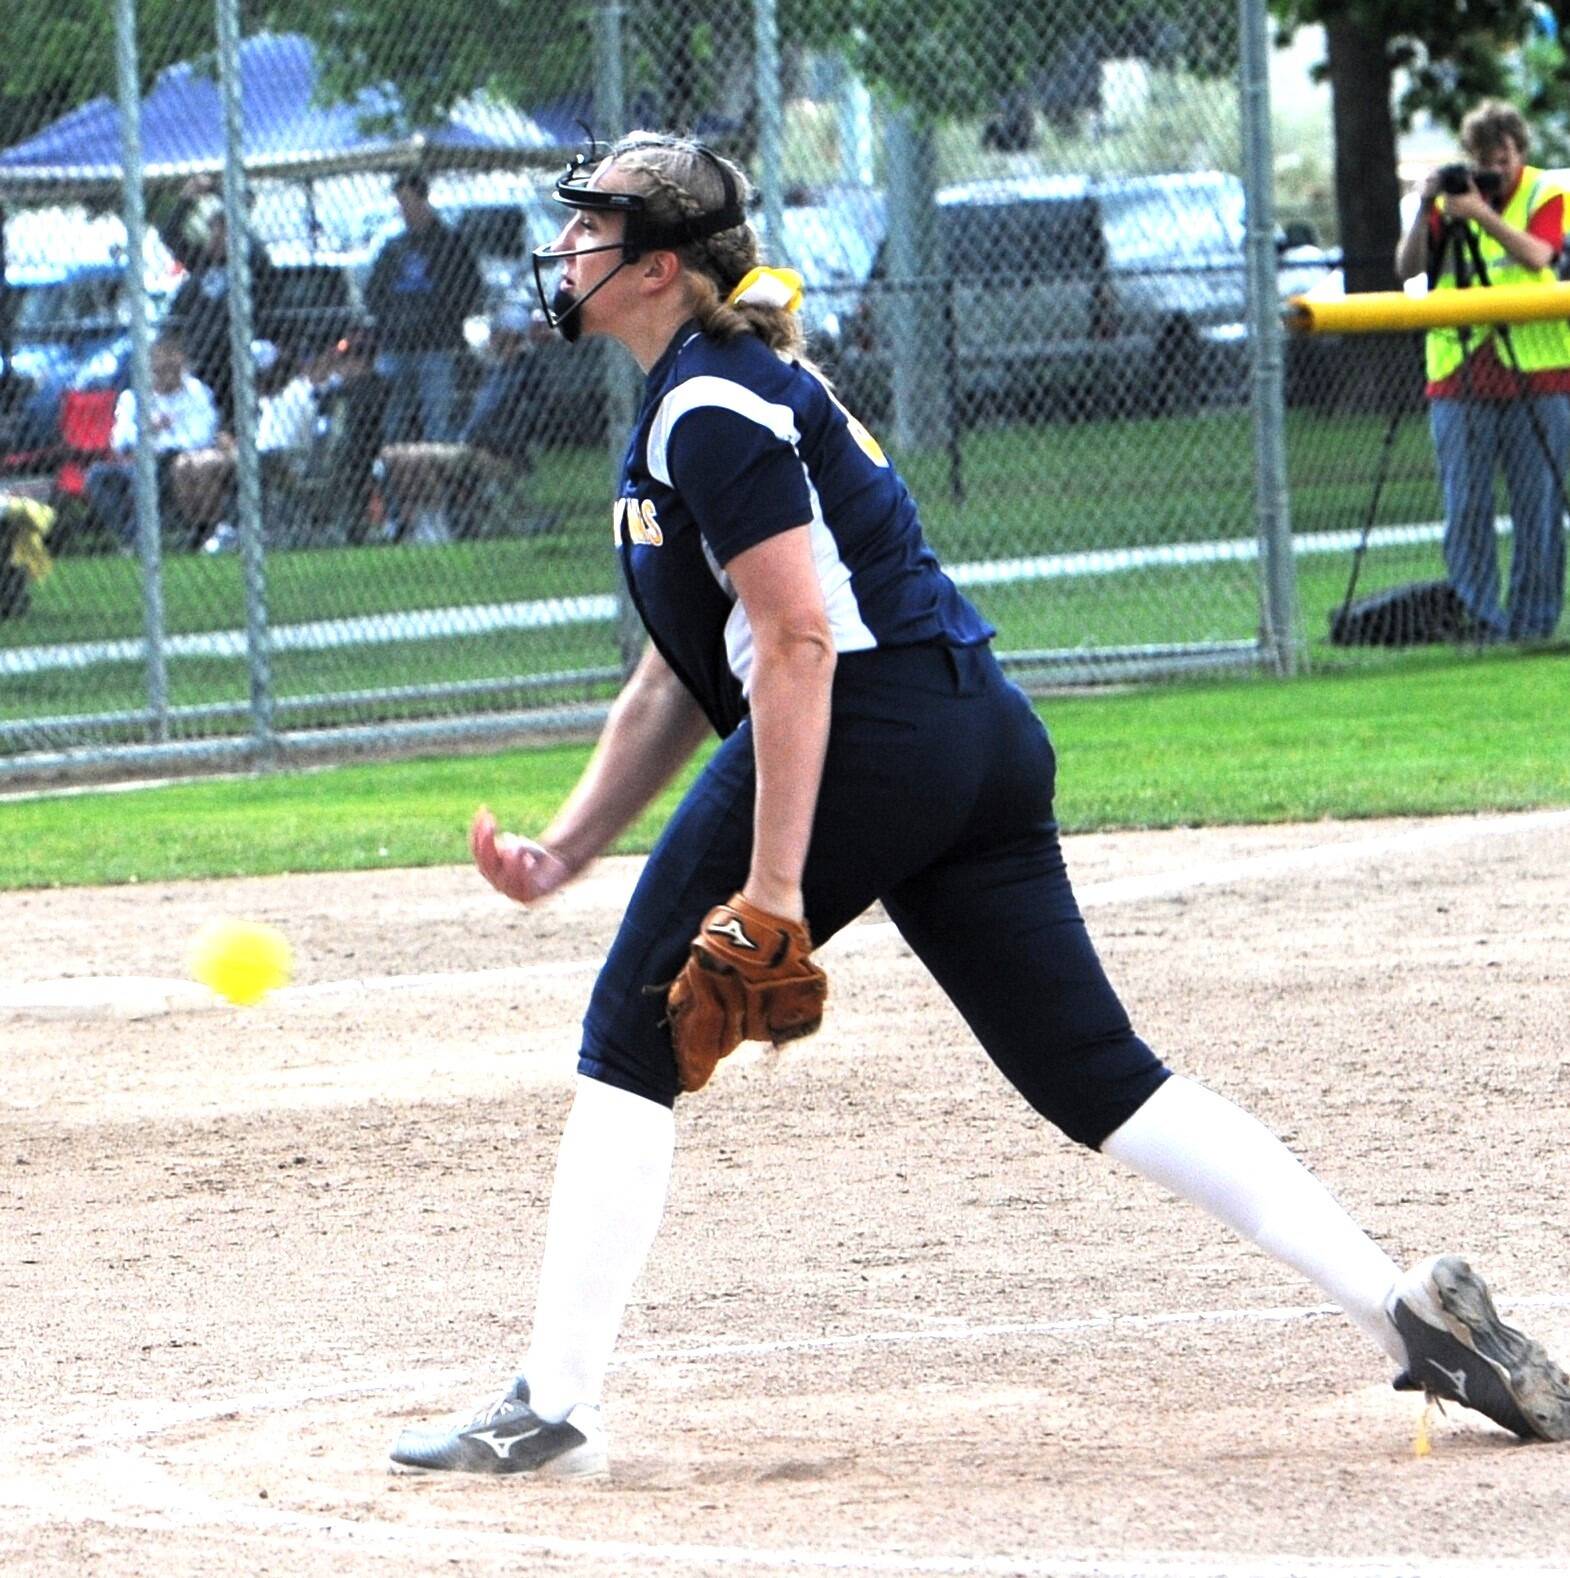 Spartan pitcher Chloe Leverington in 2019 under Coach Jr. Dean helped Forks to a fourth place finish at State in class 1A competition. Leverington, now a junior at Saint Martin’s University, is their primary pitcher. Photo by Lonnie Archibald